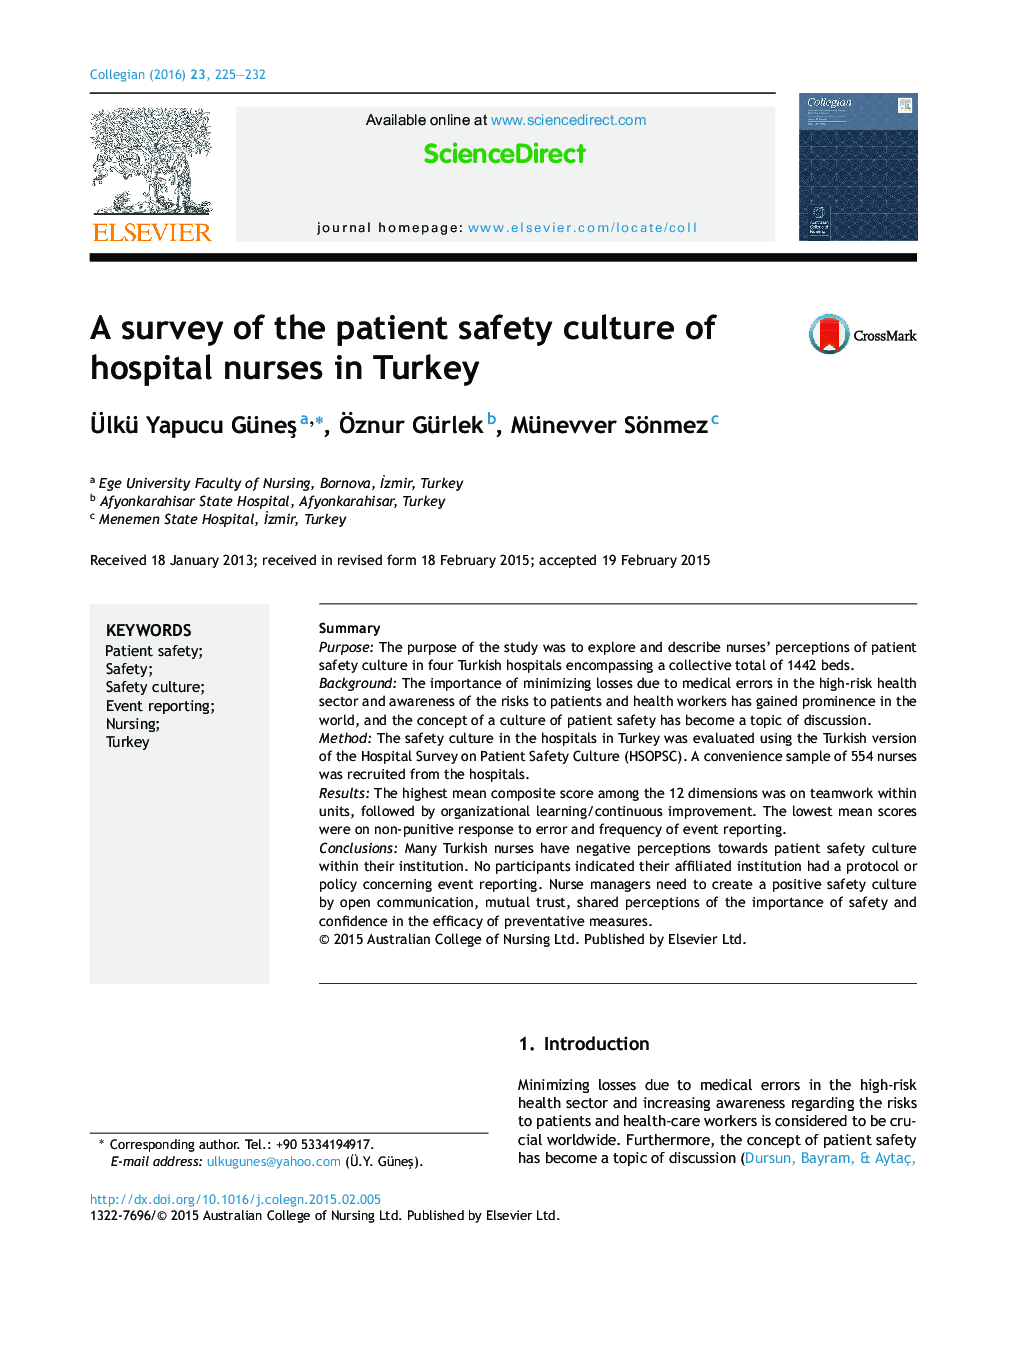 A survey of the patient safety culture of hospital nurses in Turkey